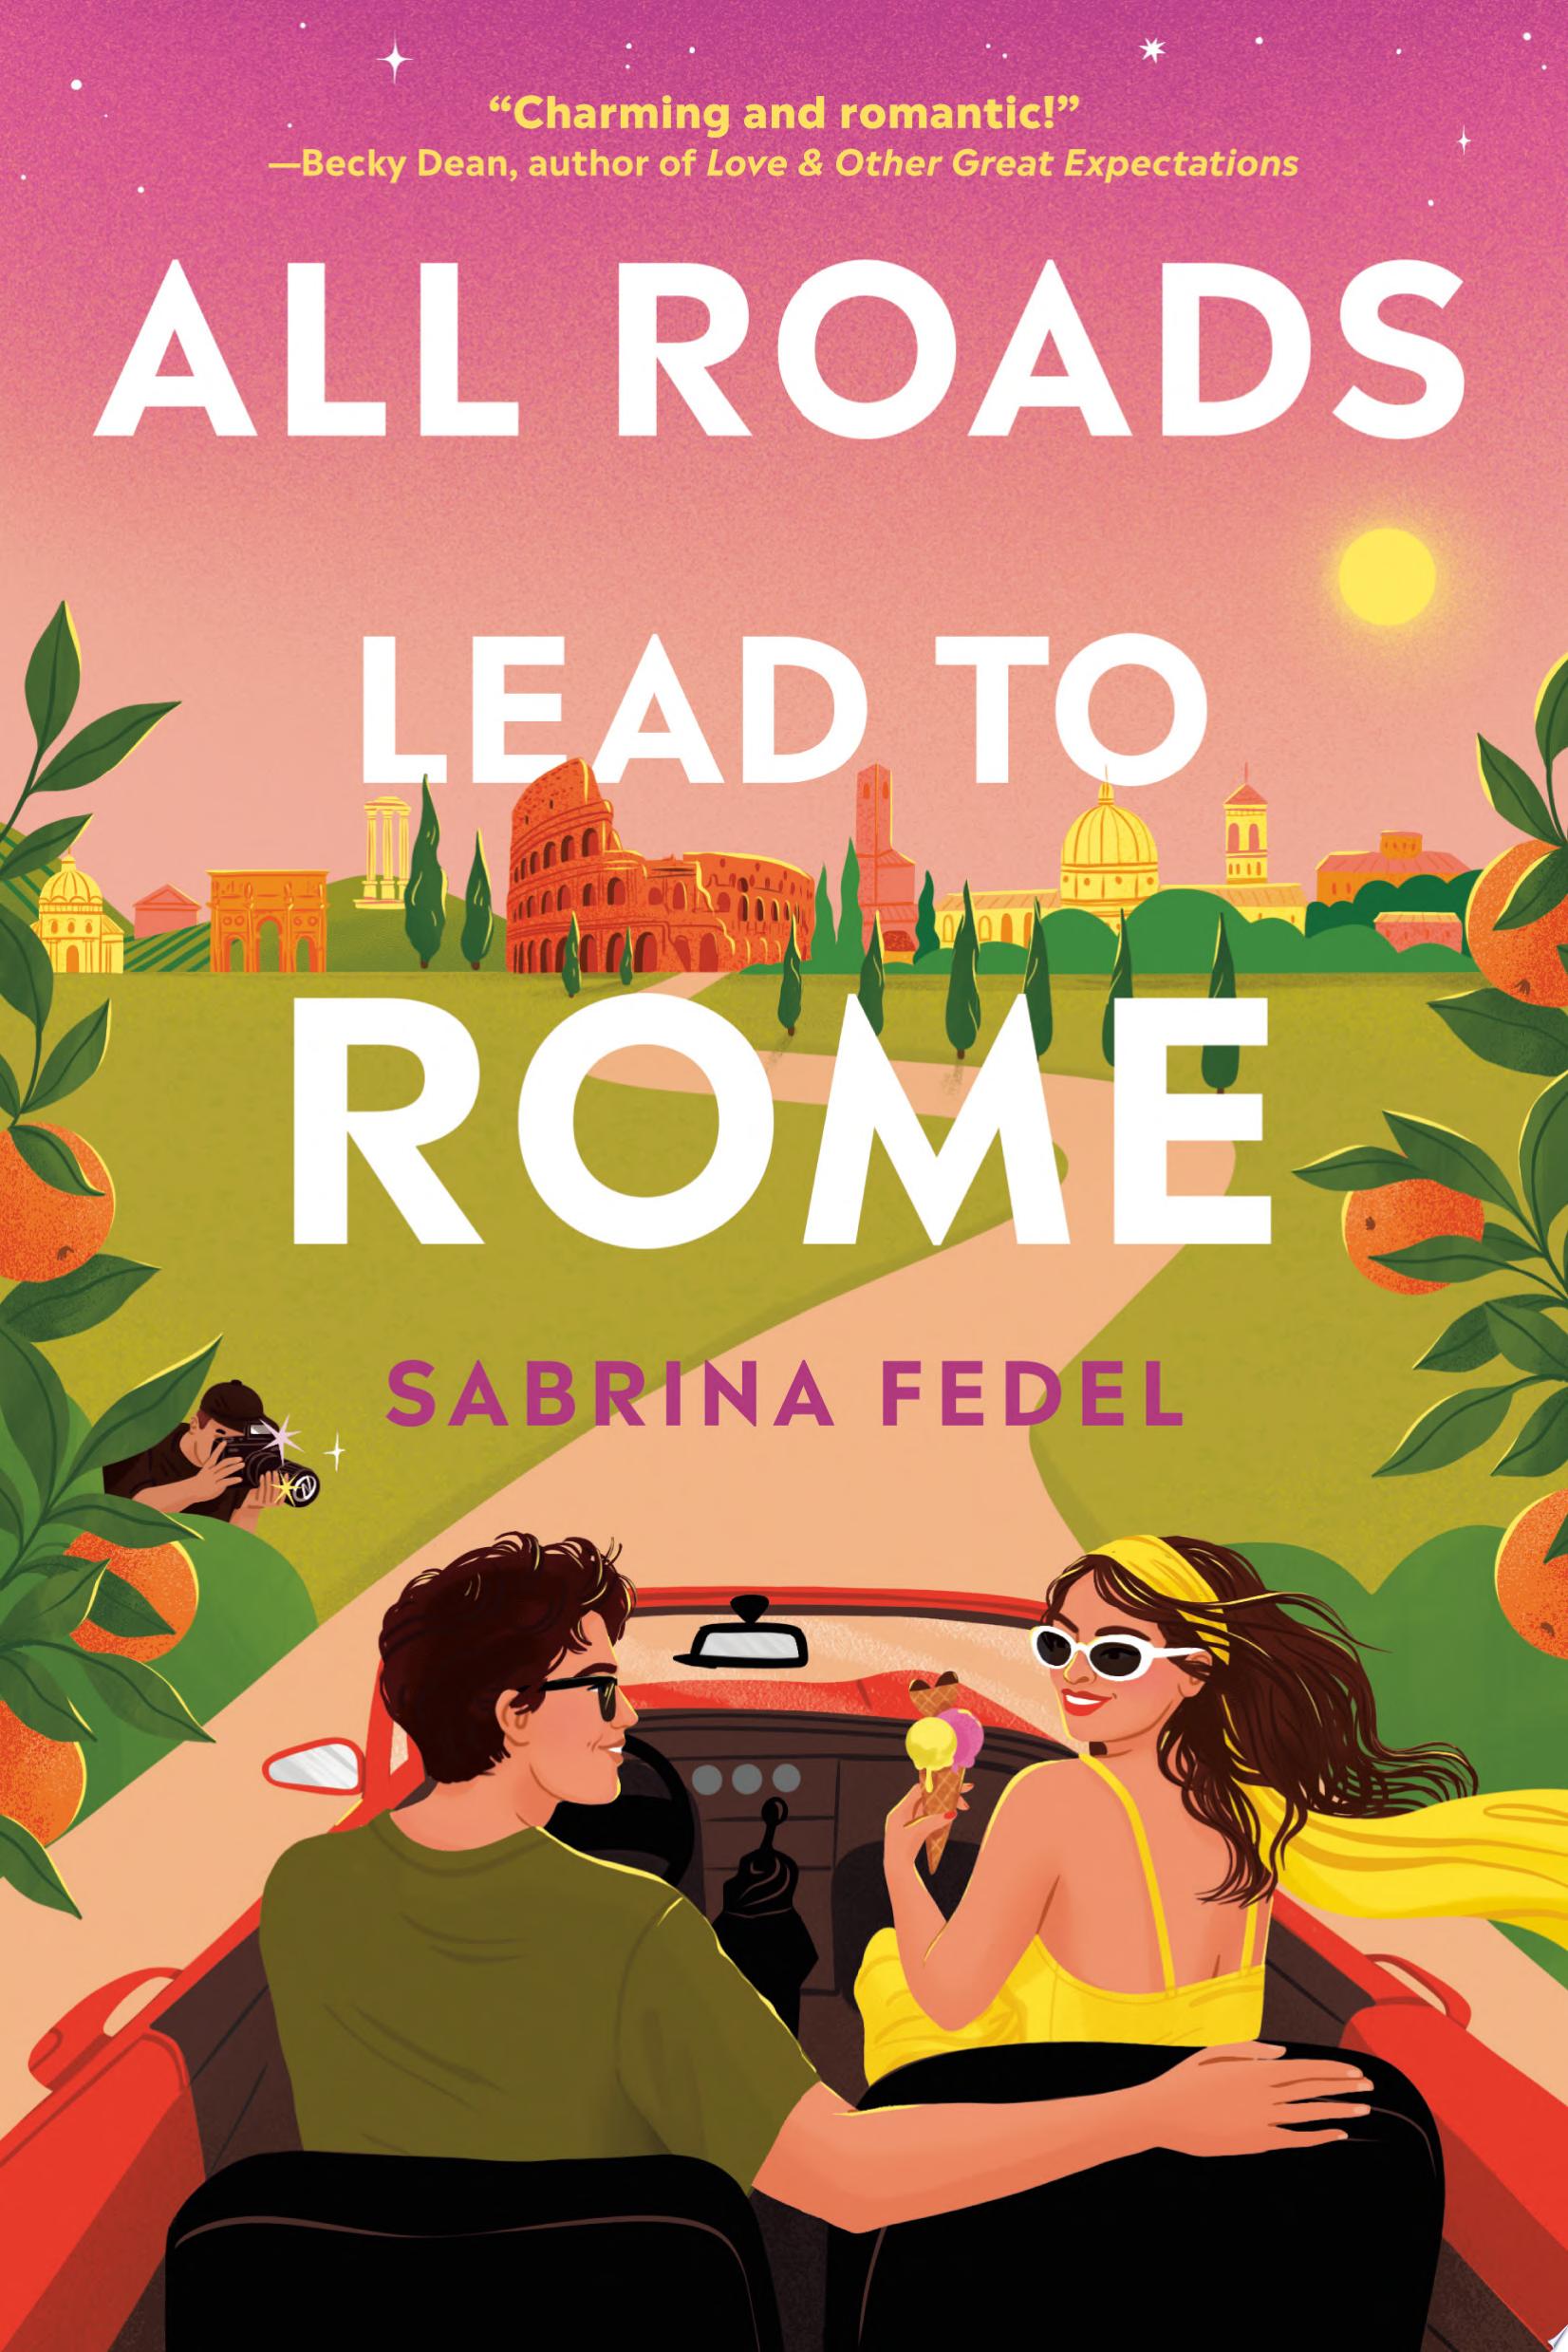 Image for "All Roads Lead to Rome"